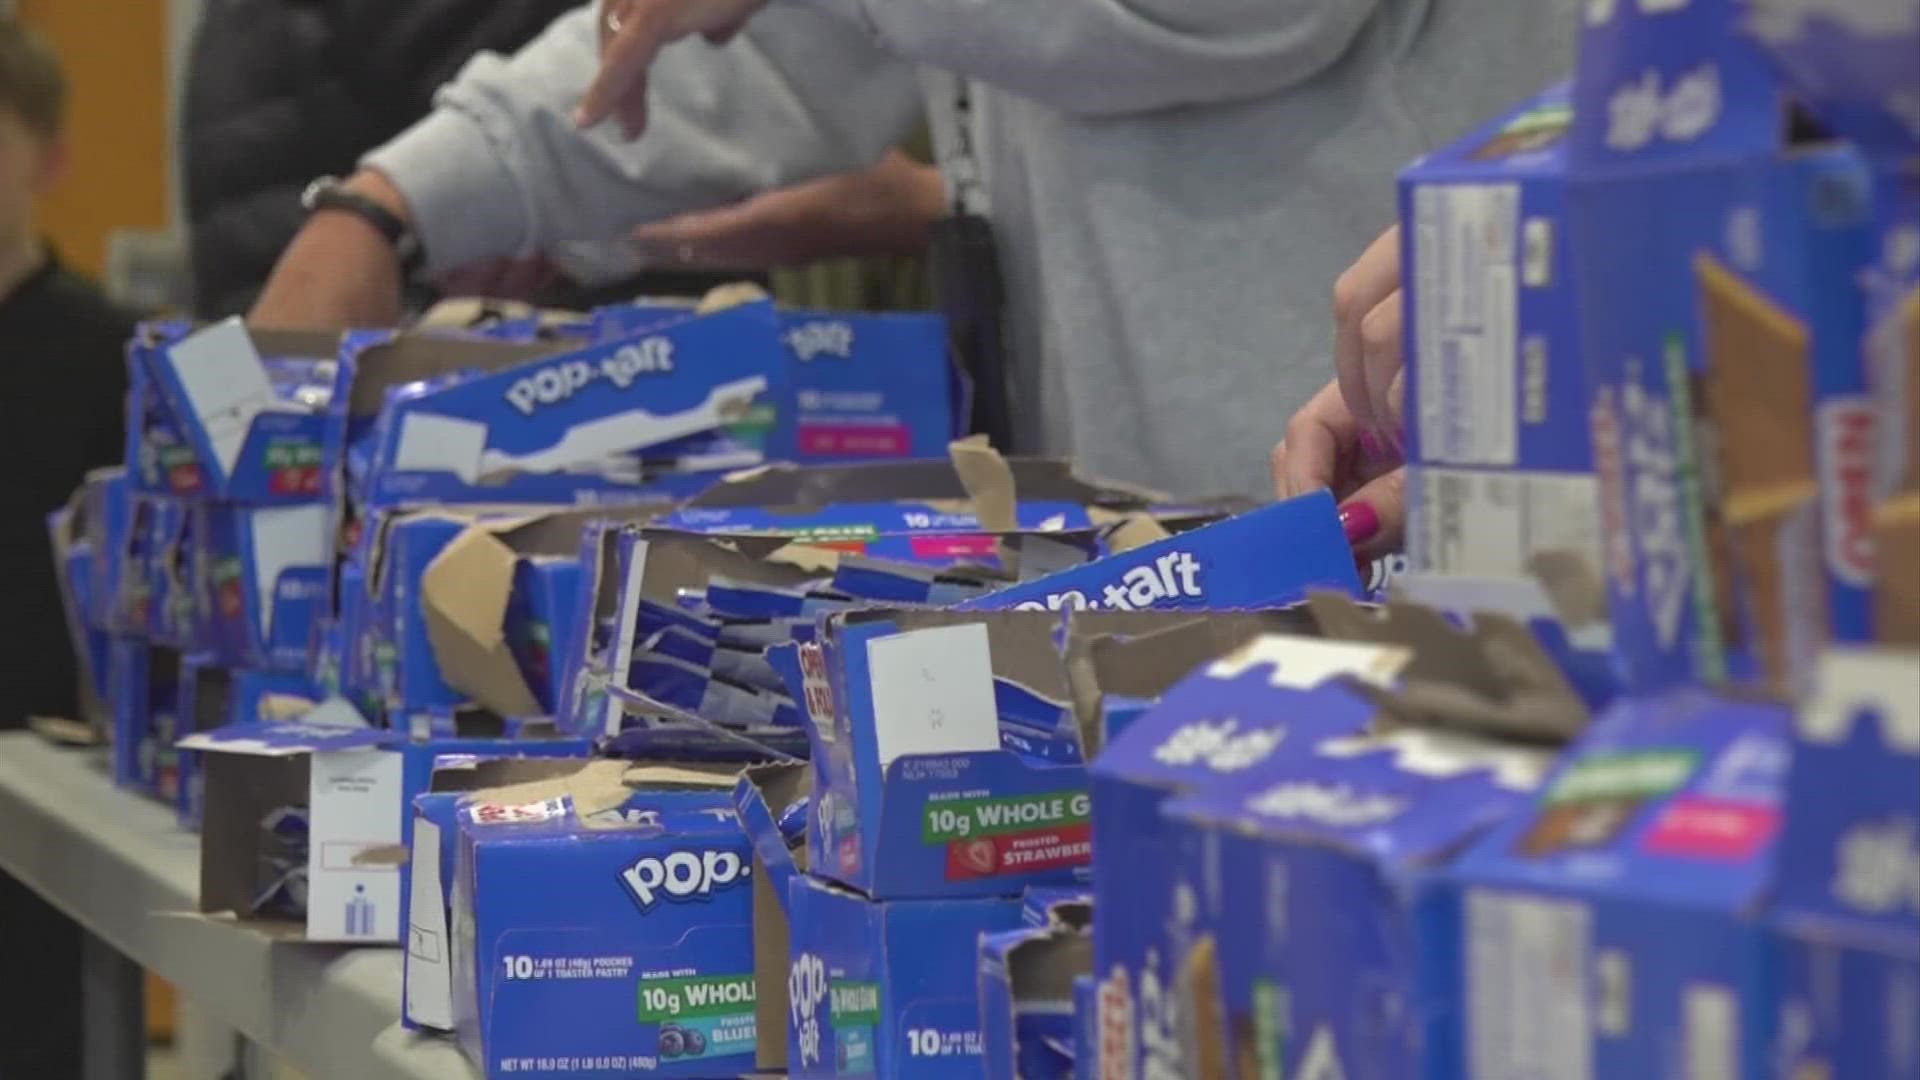 One student's actions to make Pop-Tarts for his friends has generated other acts of kindness.